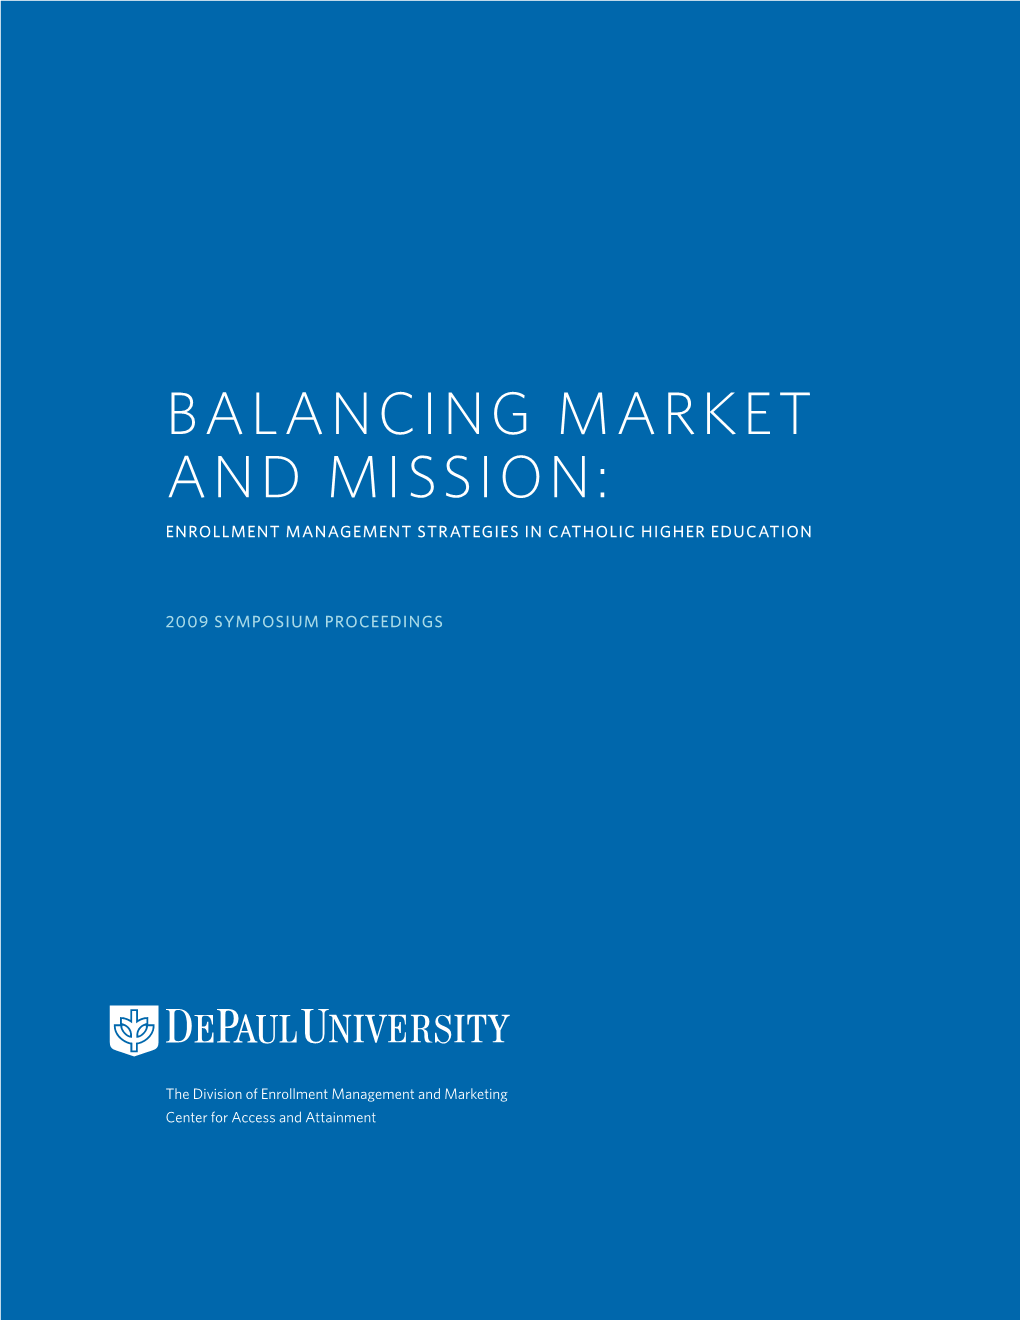 Balancing Market and Mission: Enrollment Management Strategies in Catholic Higher Education